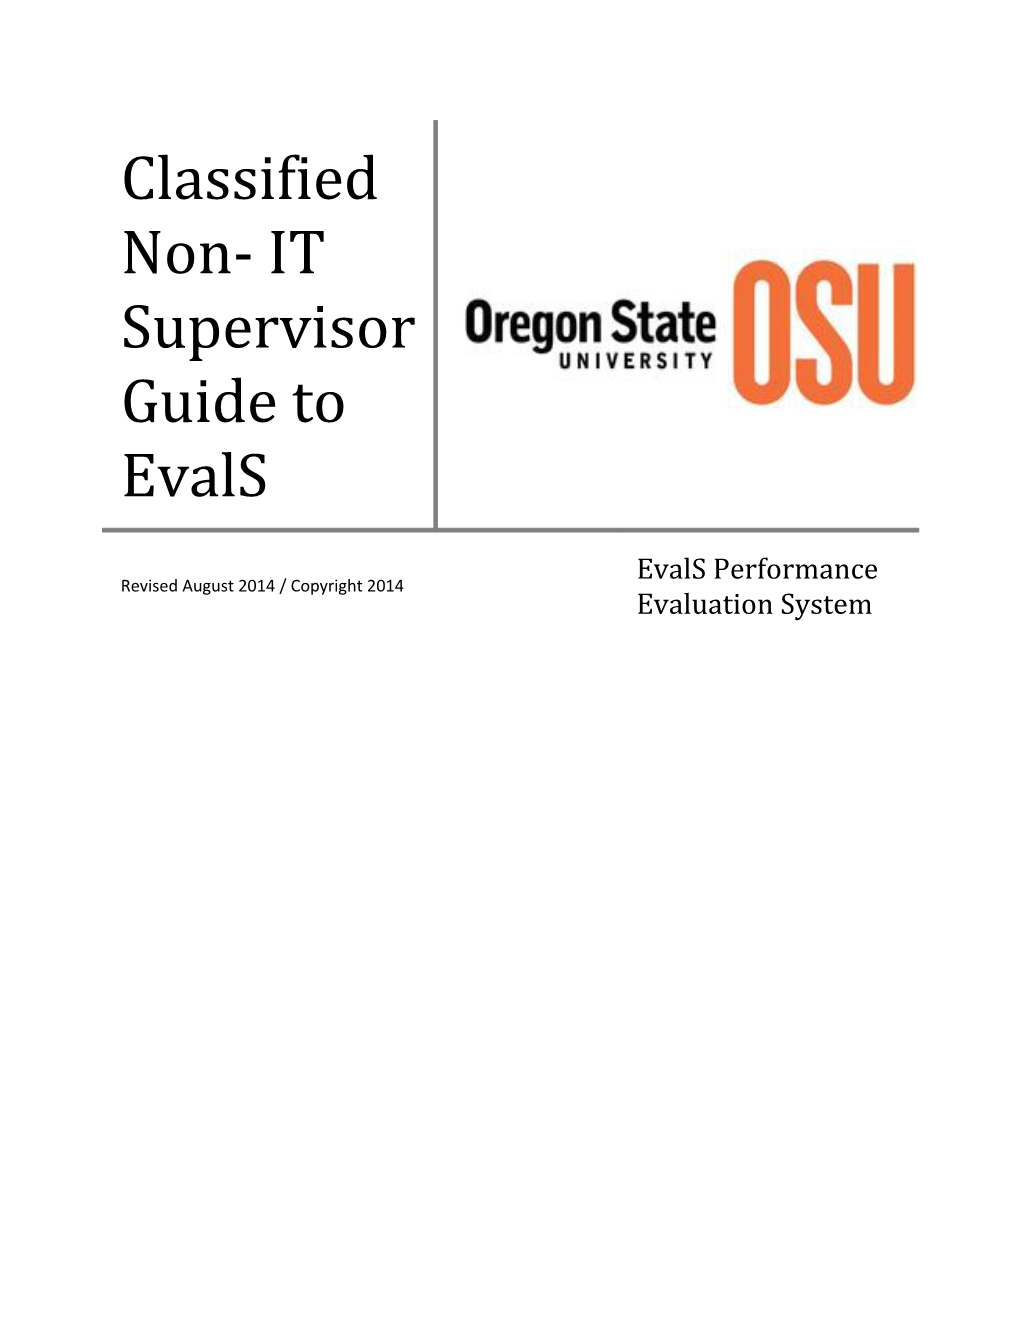 Classified Non- IT Supervisor Guide to Evals